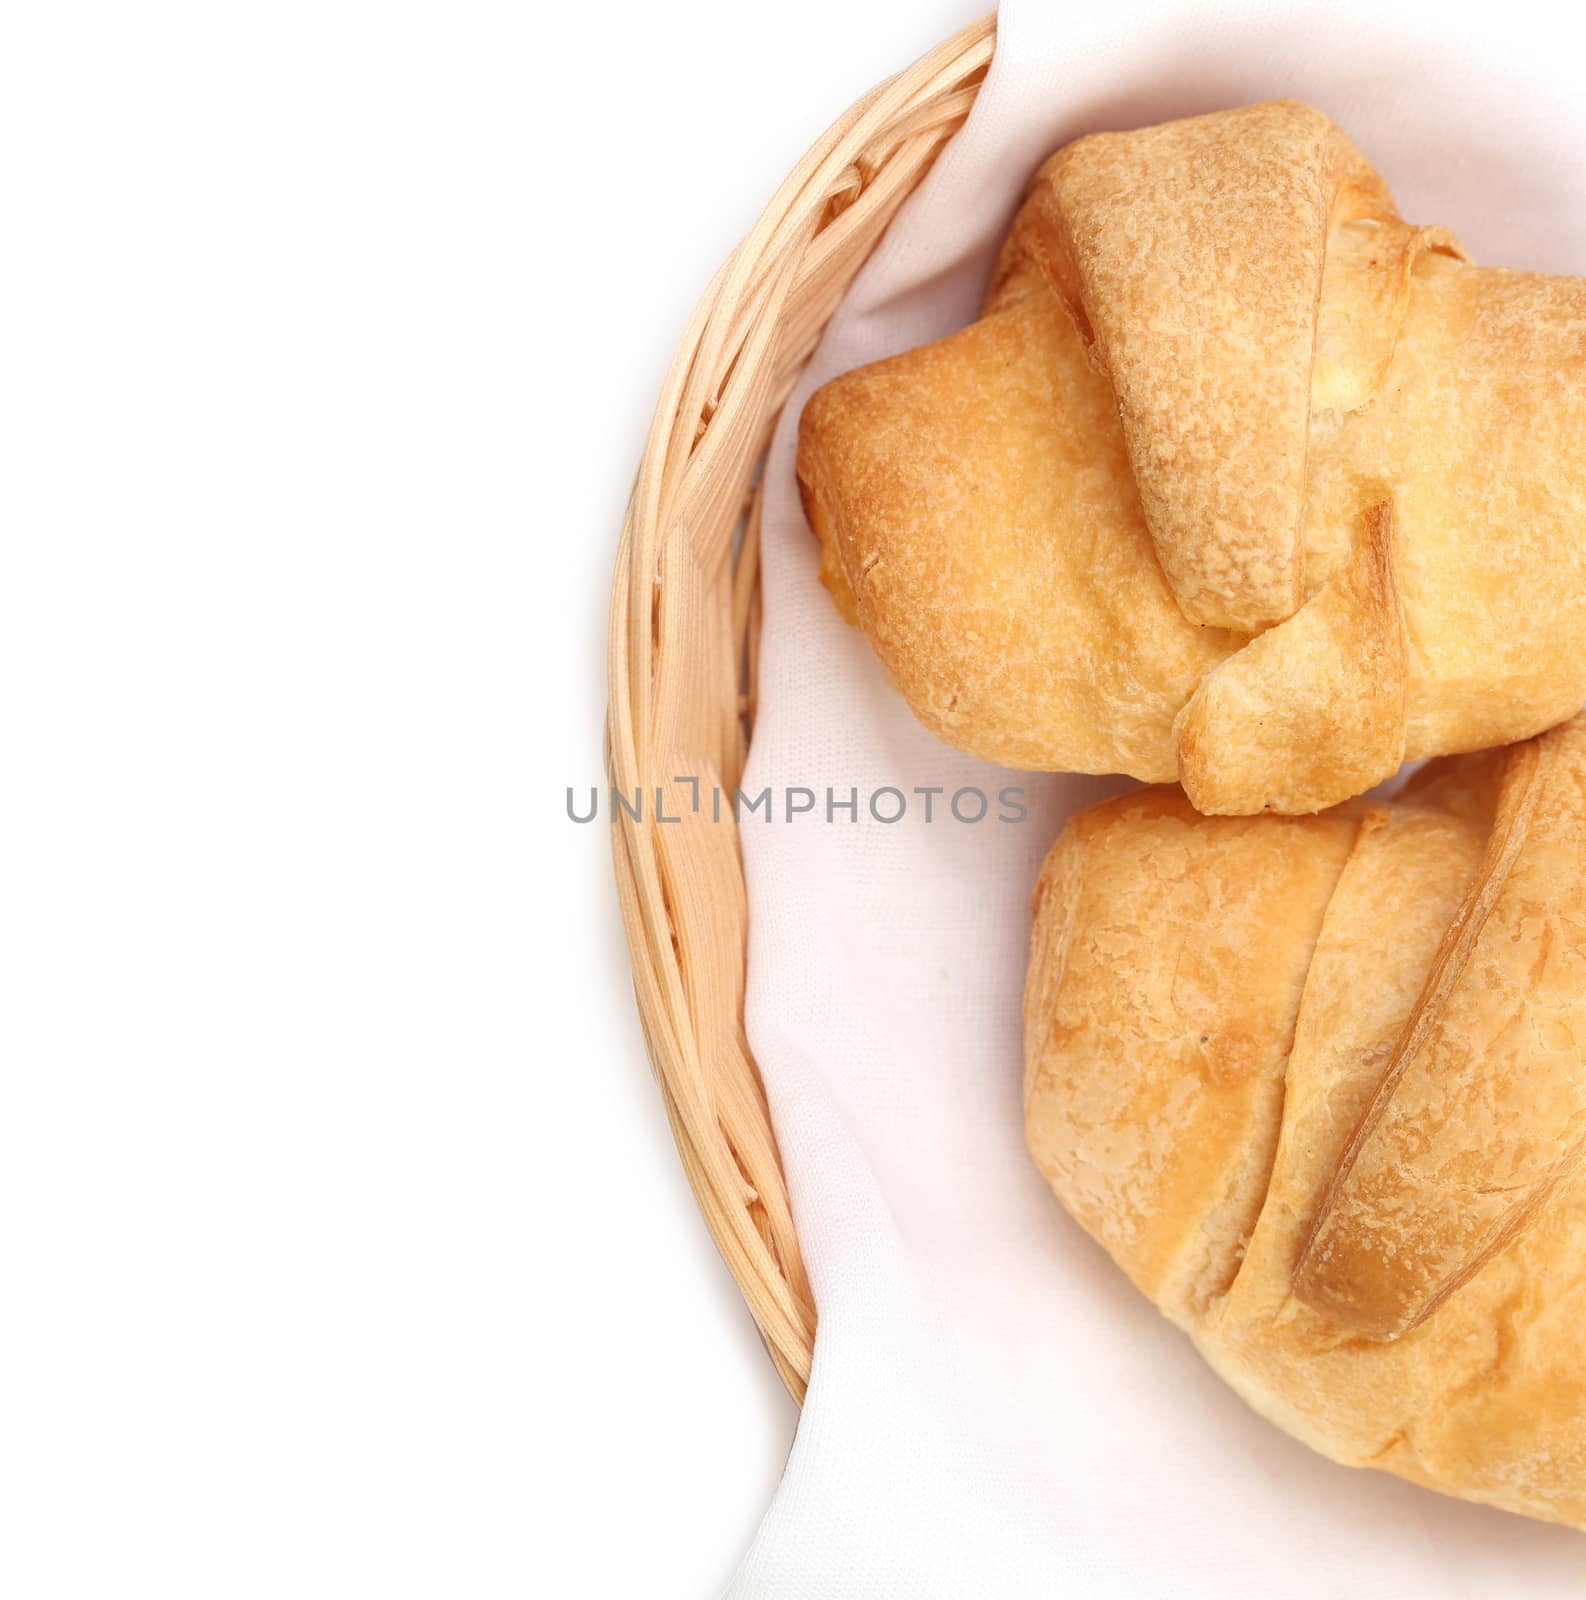 Croissants or crescent rolls in basket. Whole background.